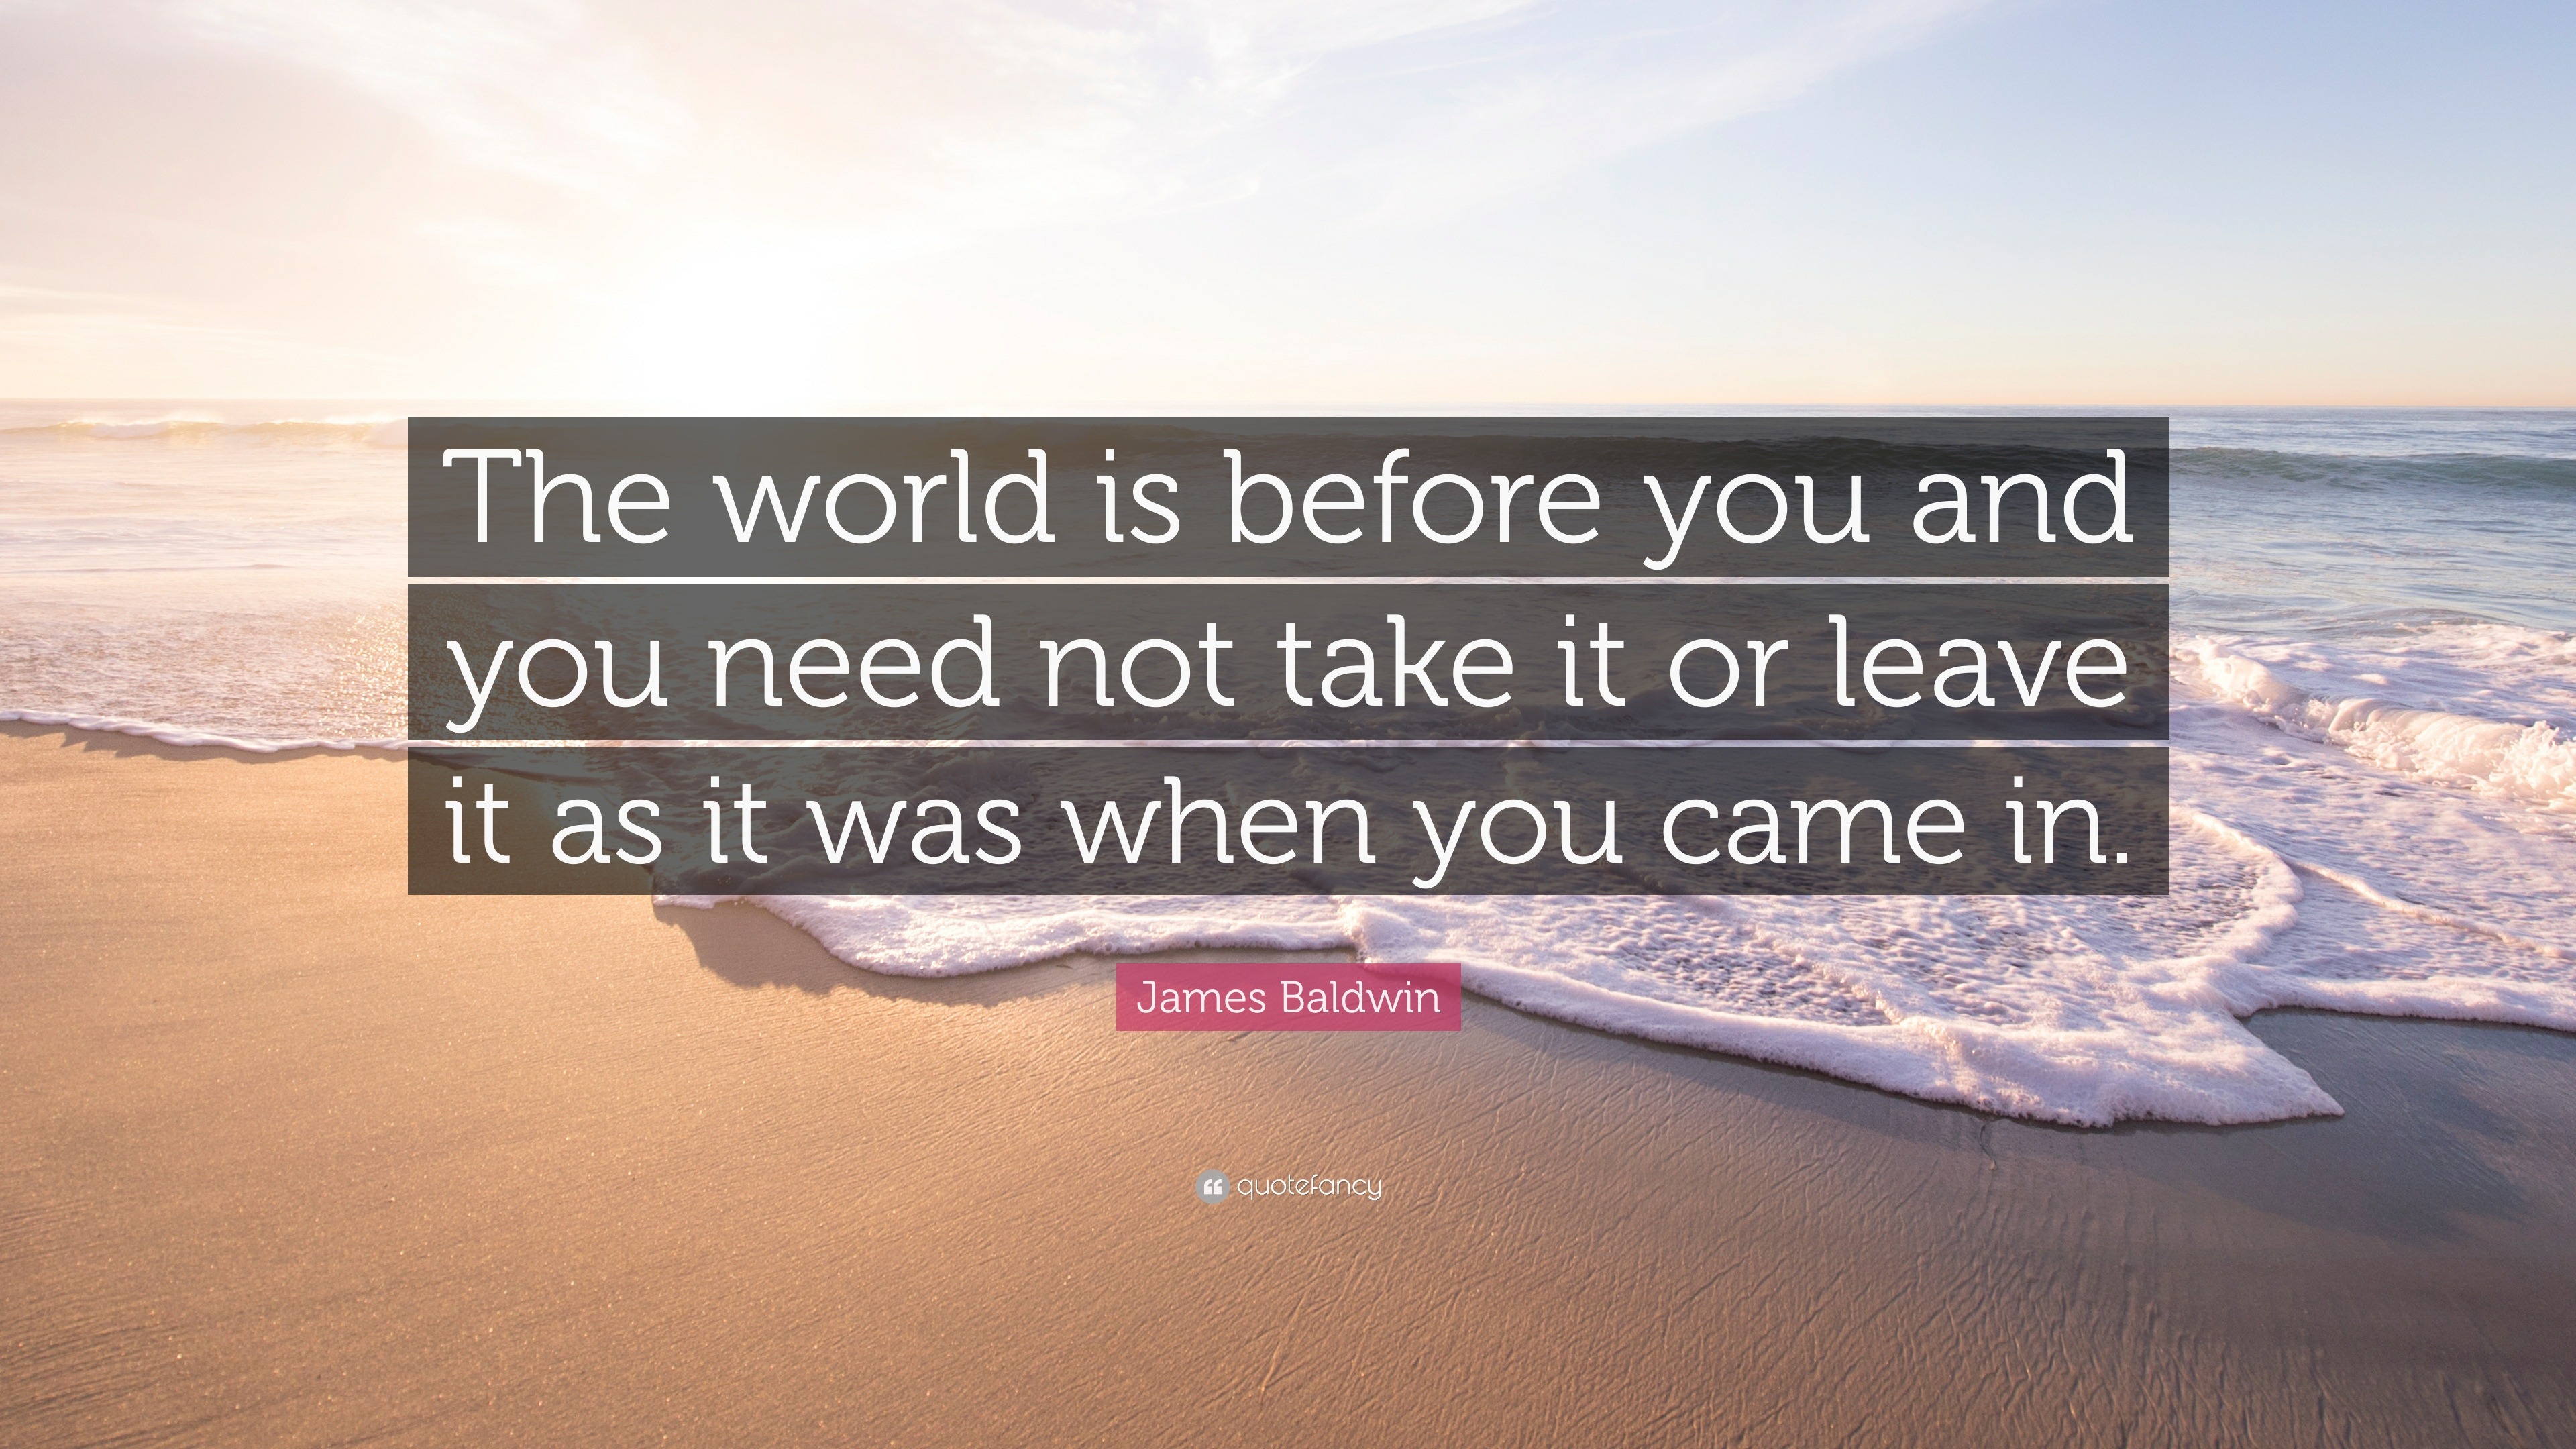 James Baldwin Quote “The world is before you and you need not take it